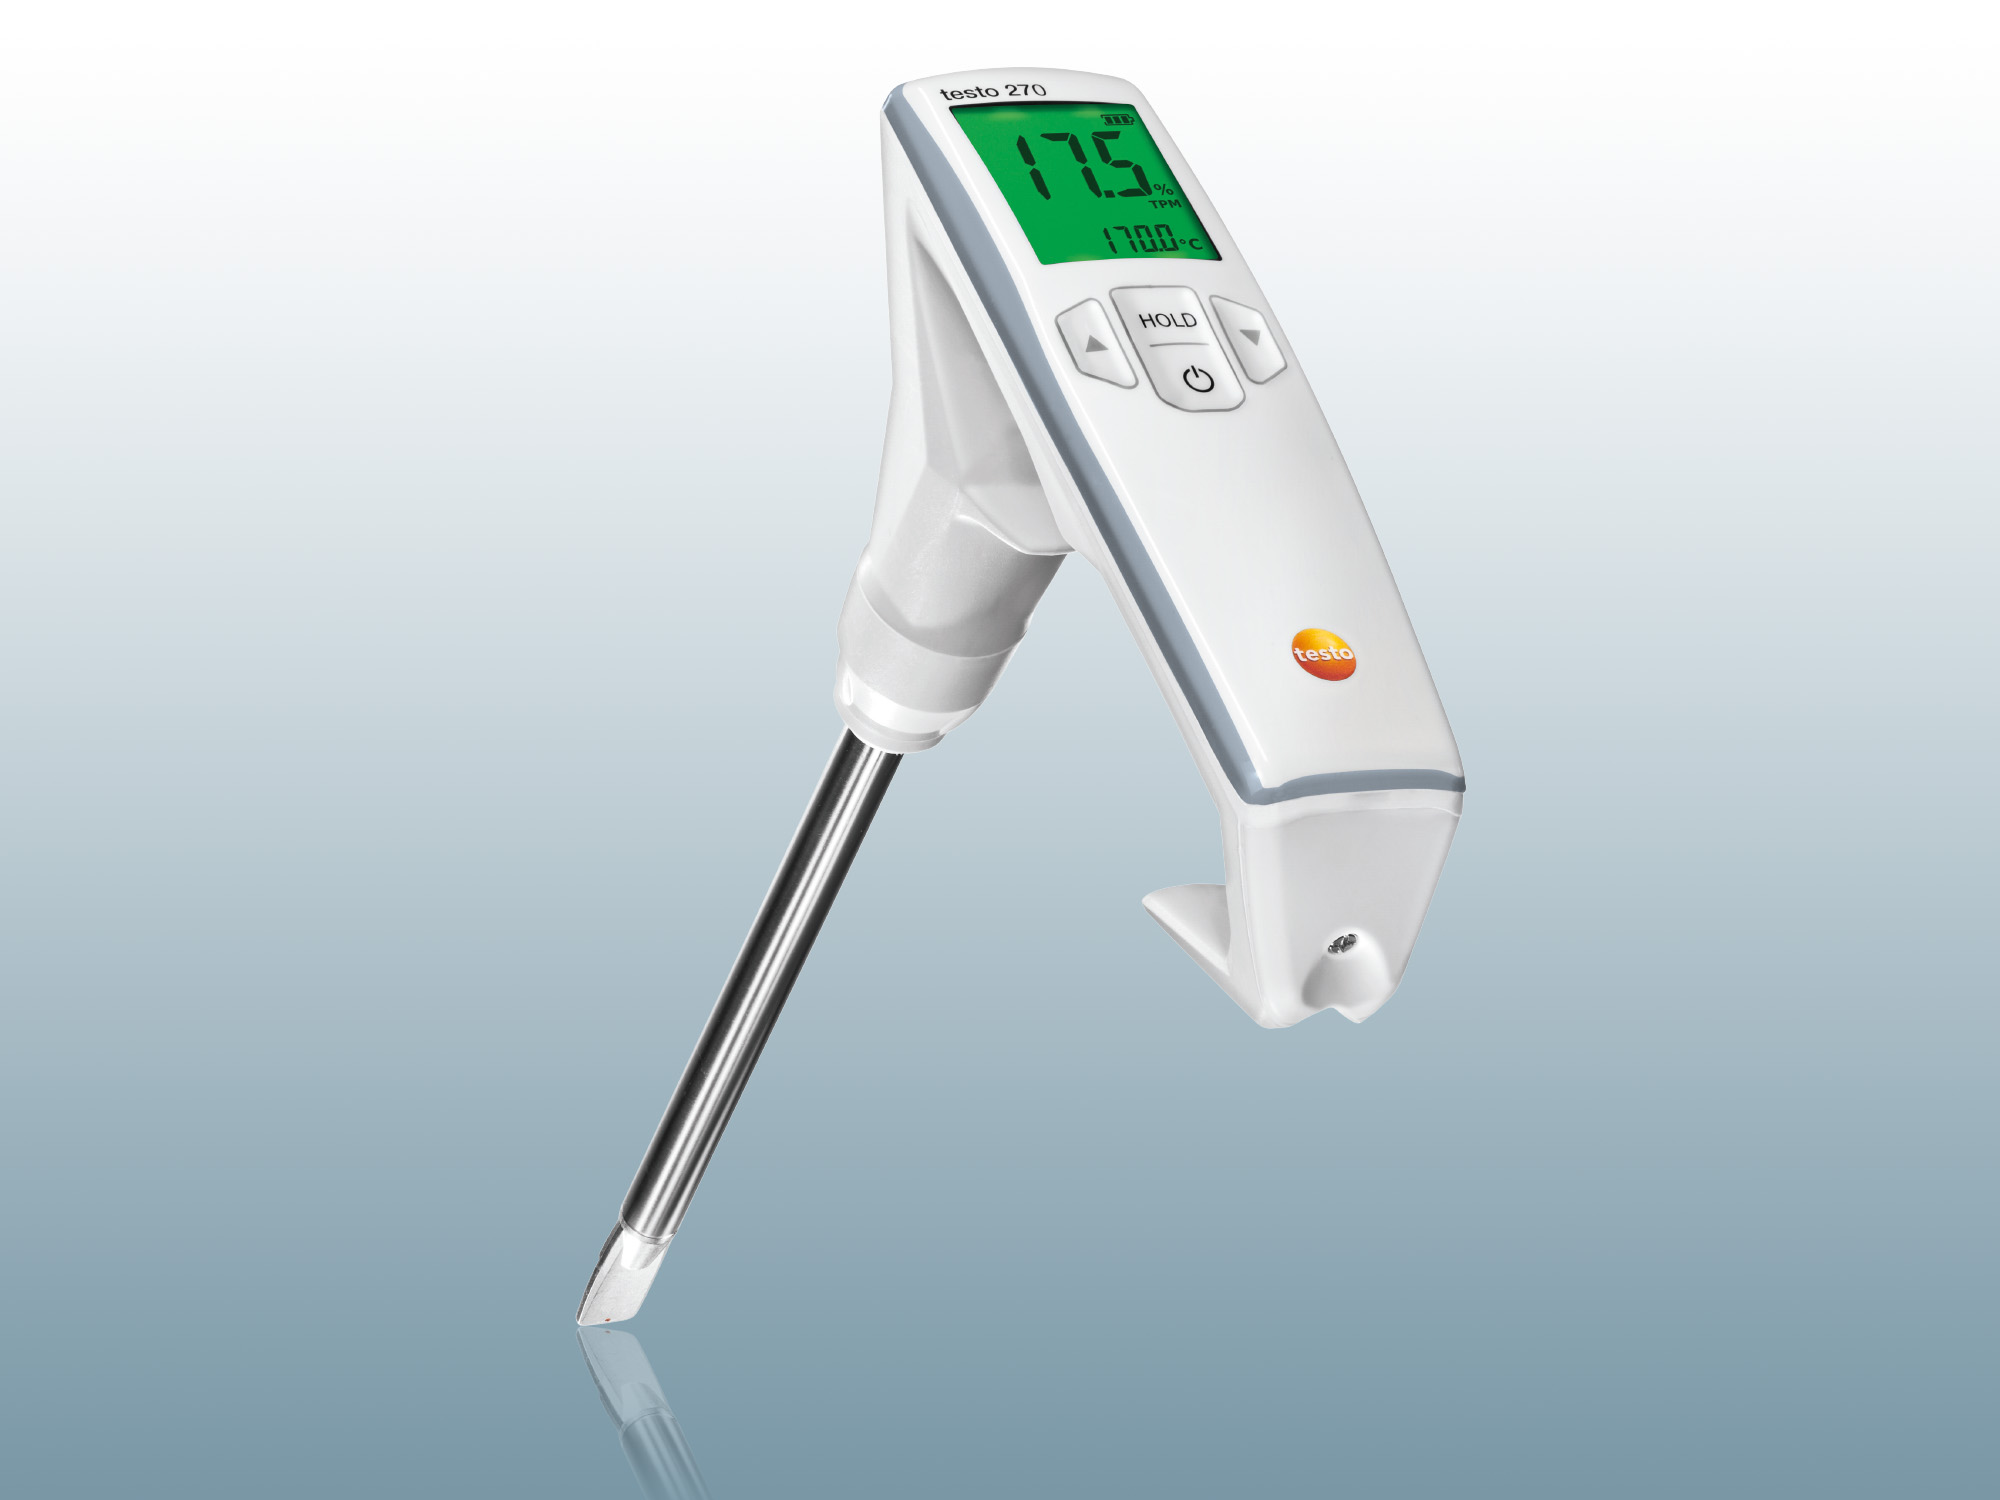 Measuring Instruments  Shop for Thermometers, pH Meters & More